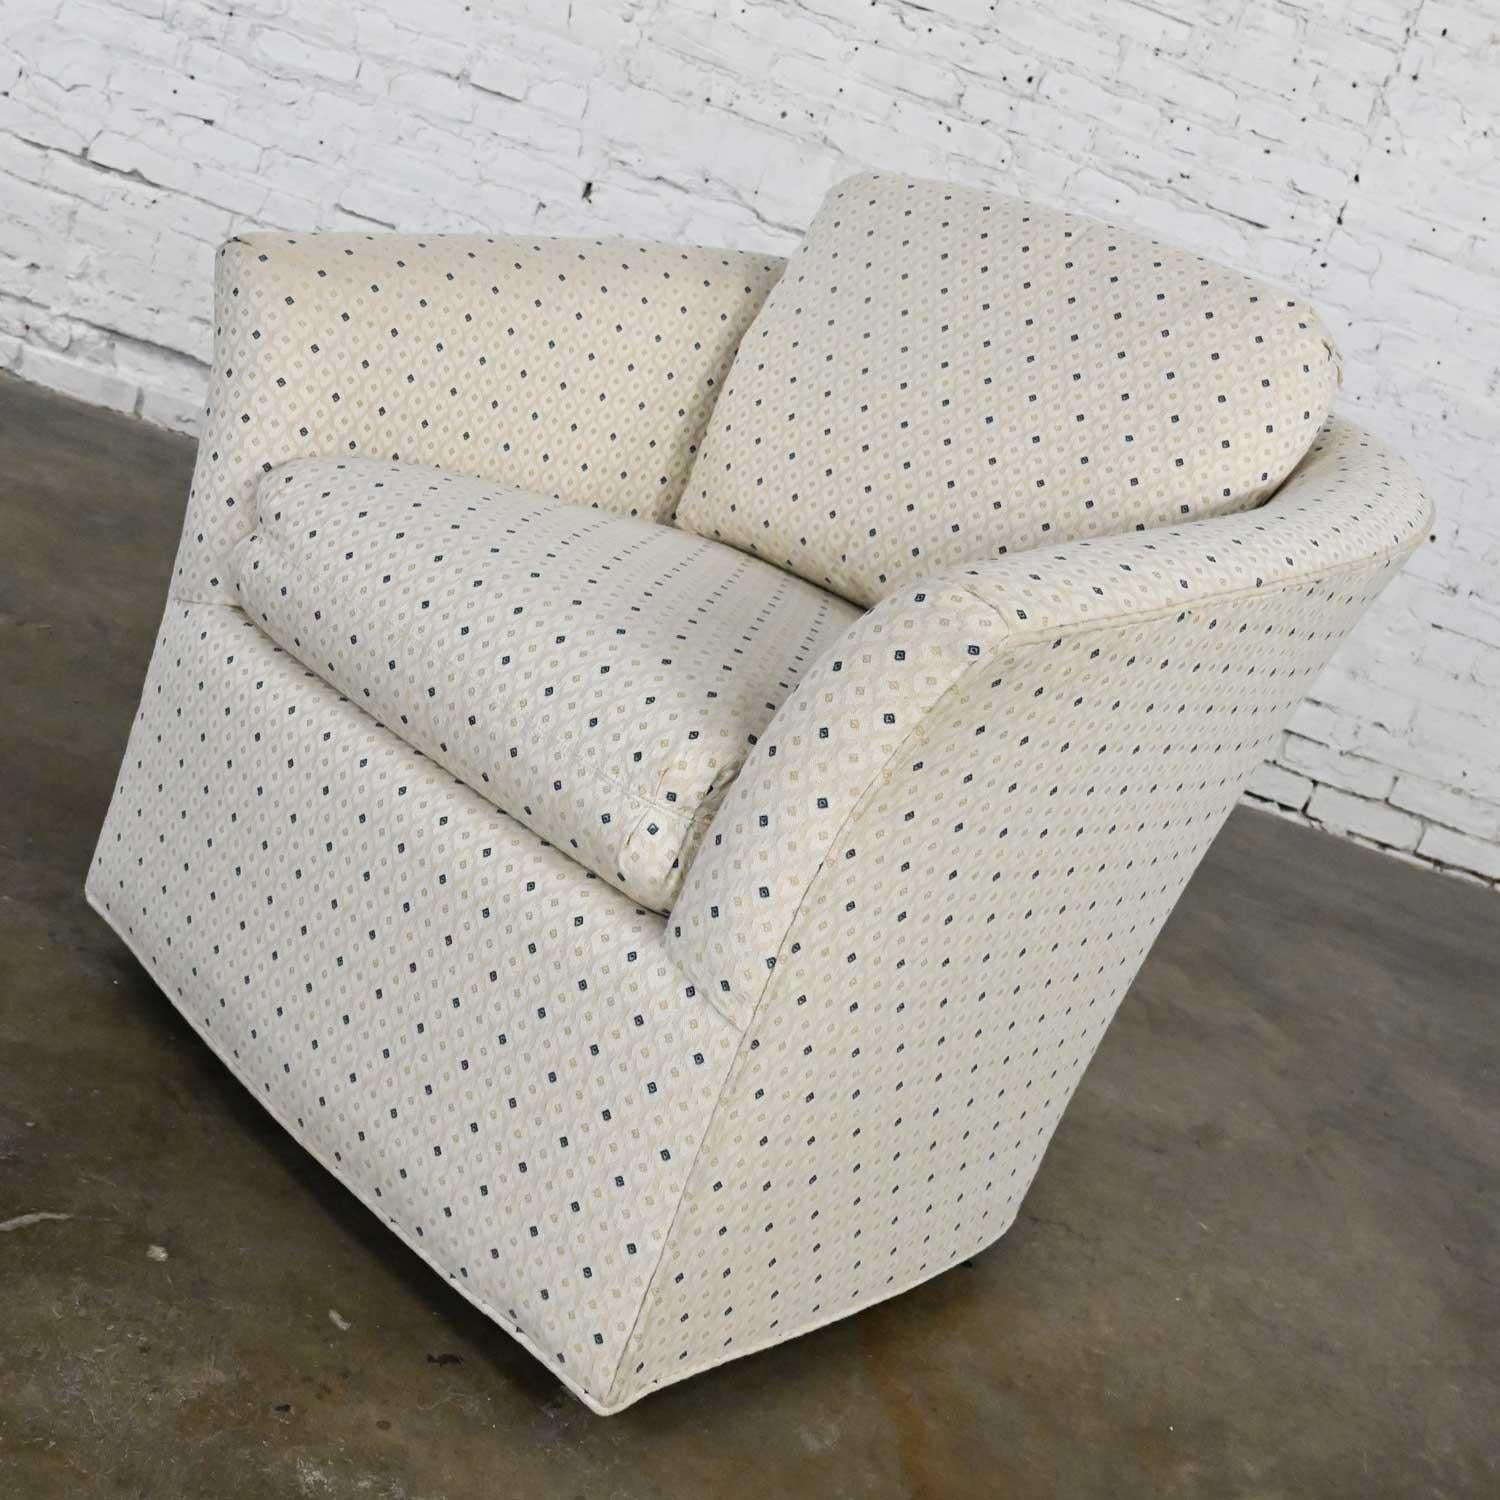 Lovely modern swivel barrel chair with off white & beige base & navy-blue diamond brocade fabric by Century Furniture. Beautiful condition, keeping in mind that this is vintage and not new so will have signs of use and wear. There are no outstanding